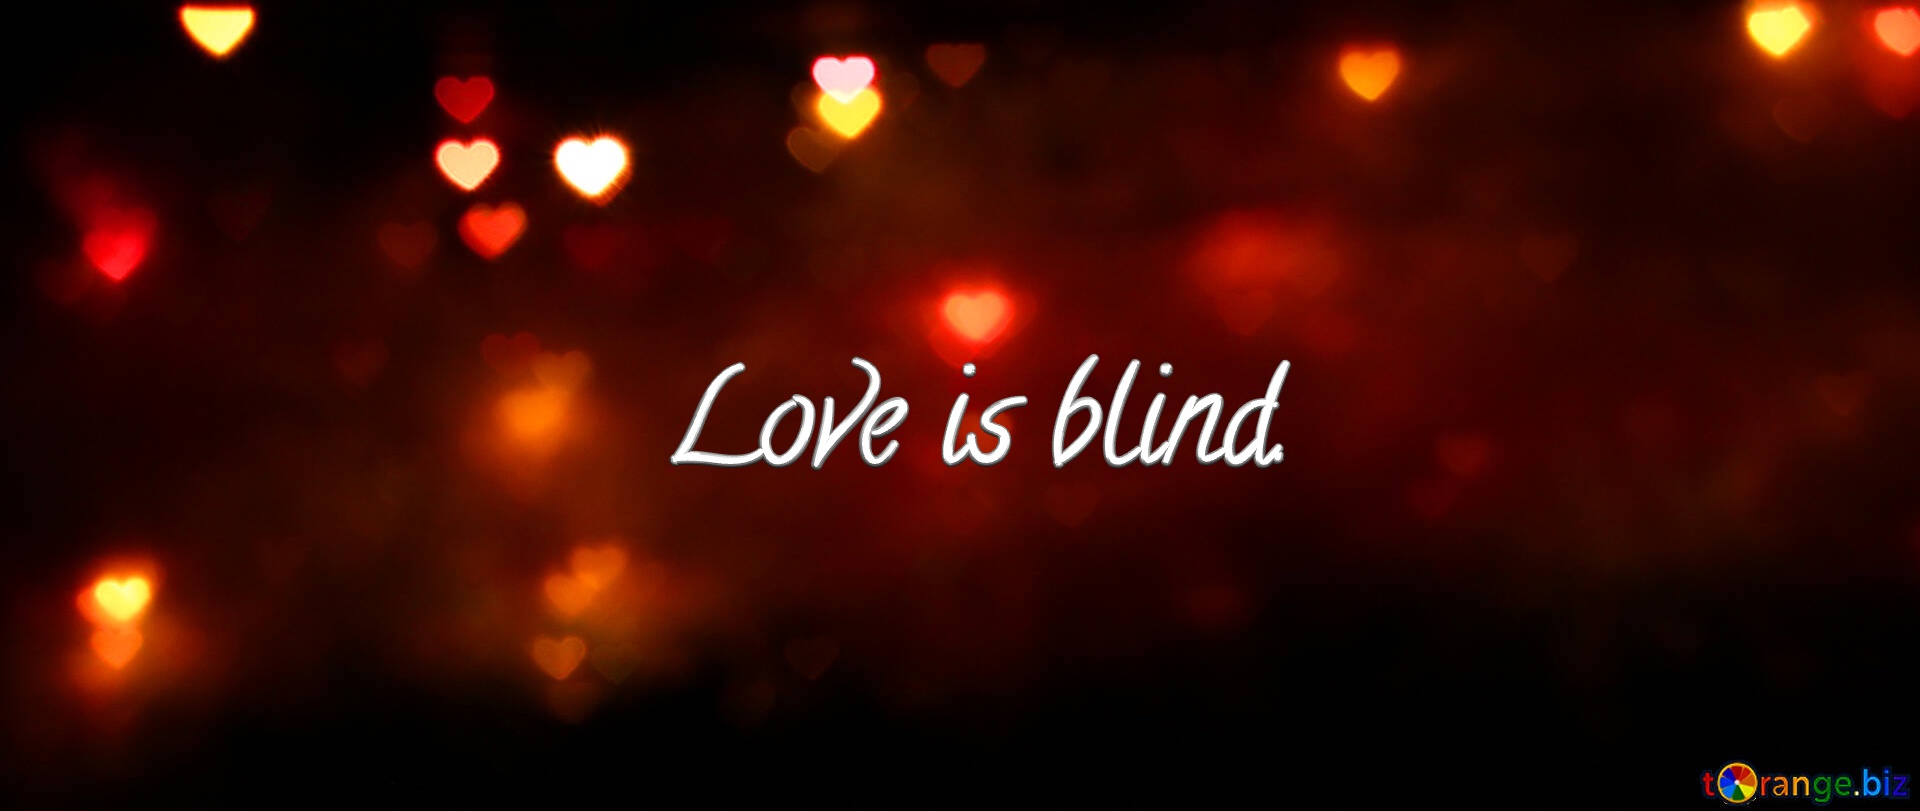 Cover for Facebook   Love is blind. Cover for Twitter wedding hearts №37856